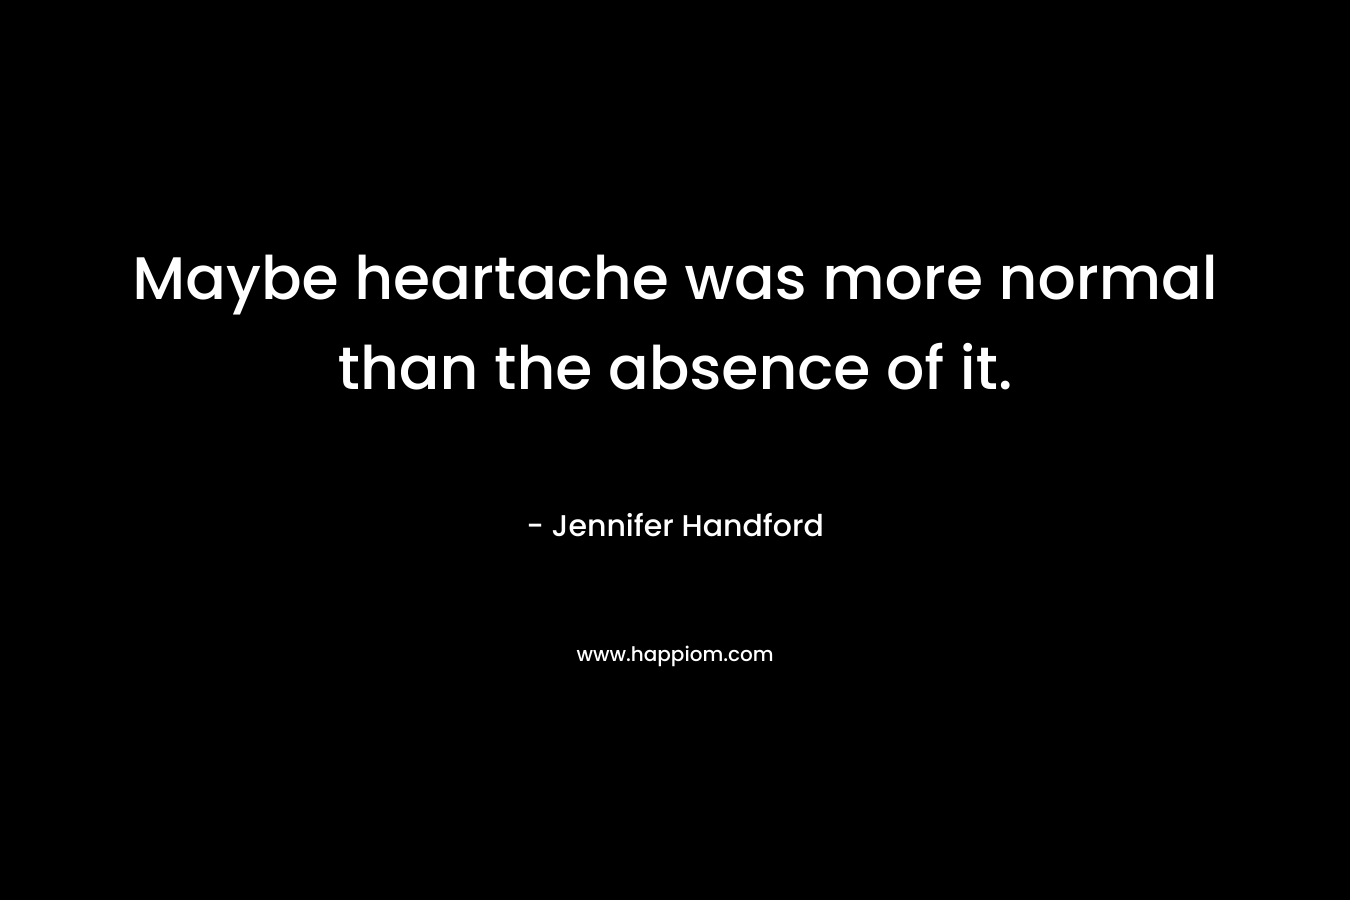 Maybe heartache was more normal than the absence of it.